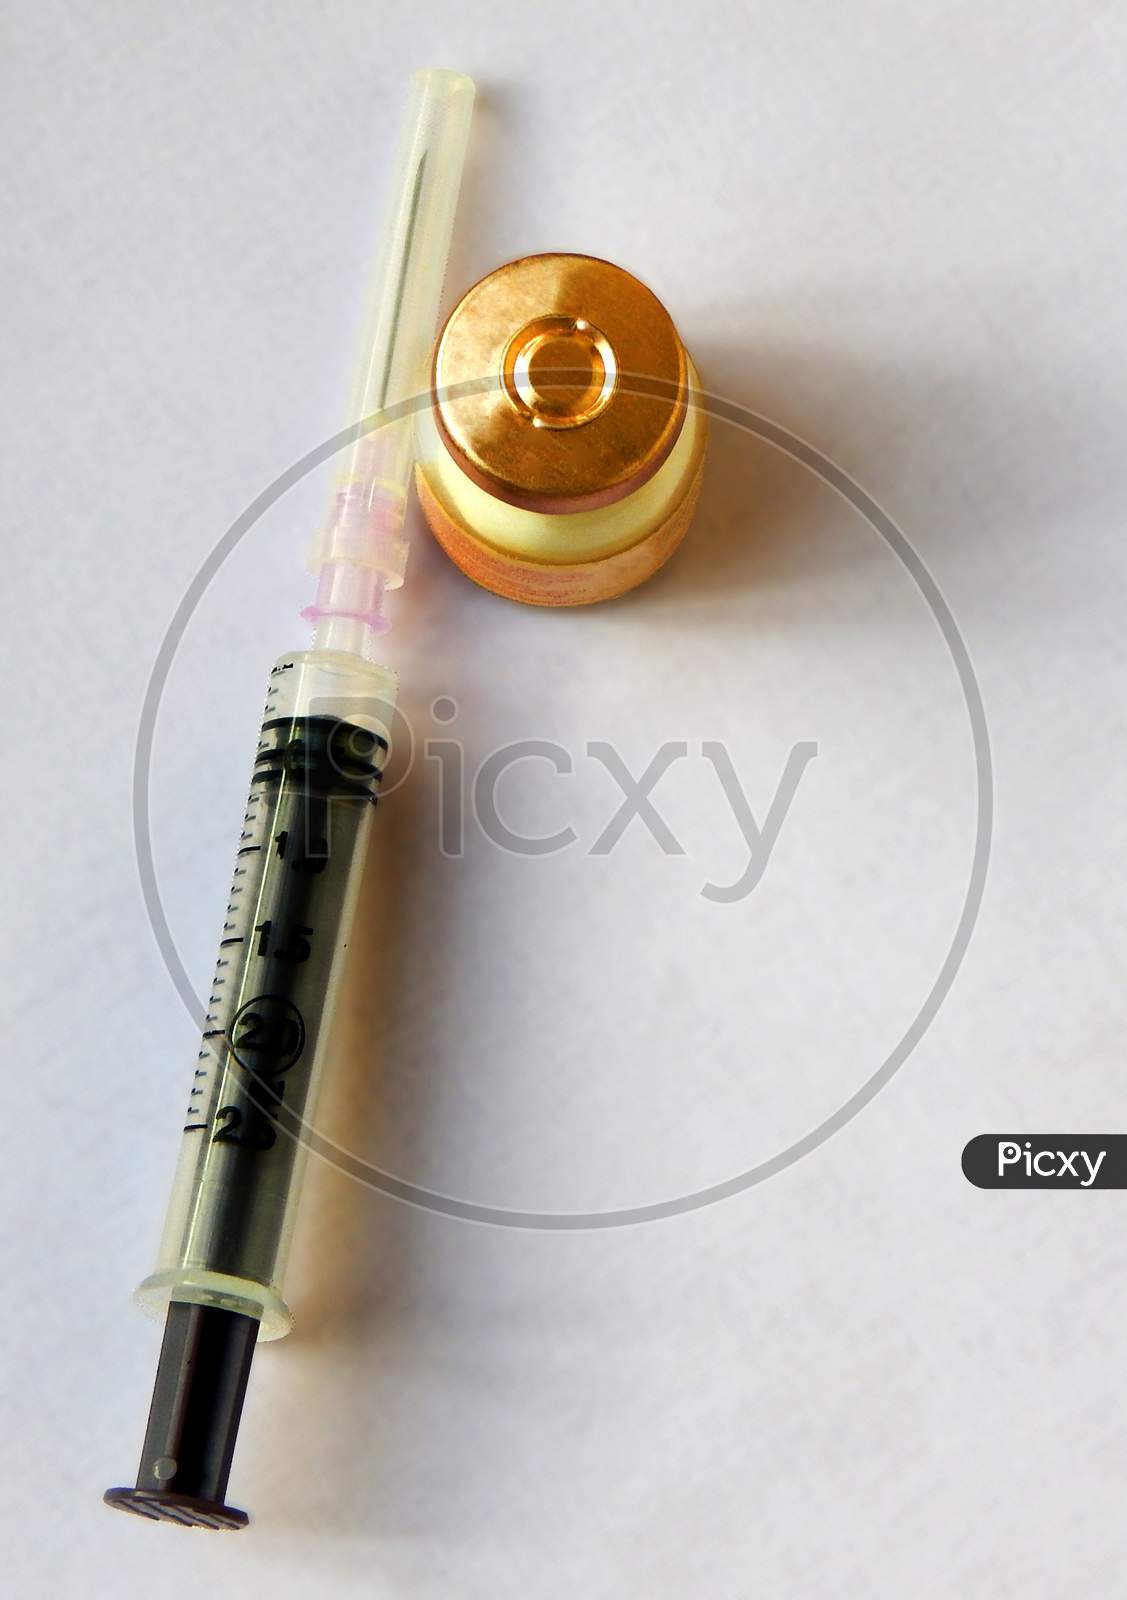 View Of Ampoules And Syringe For Injection